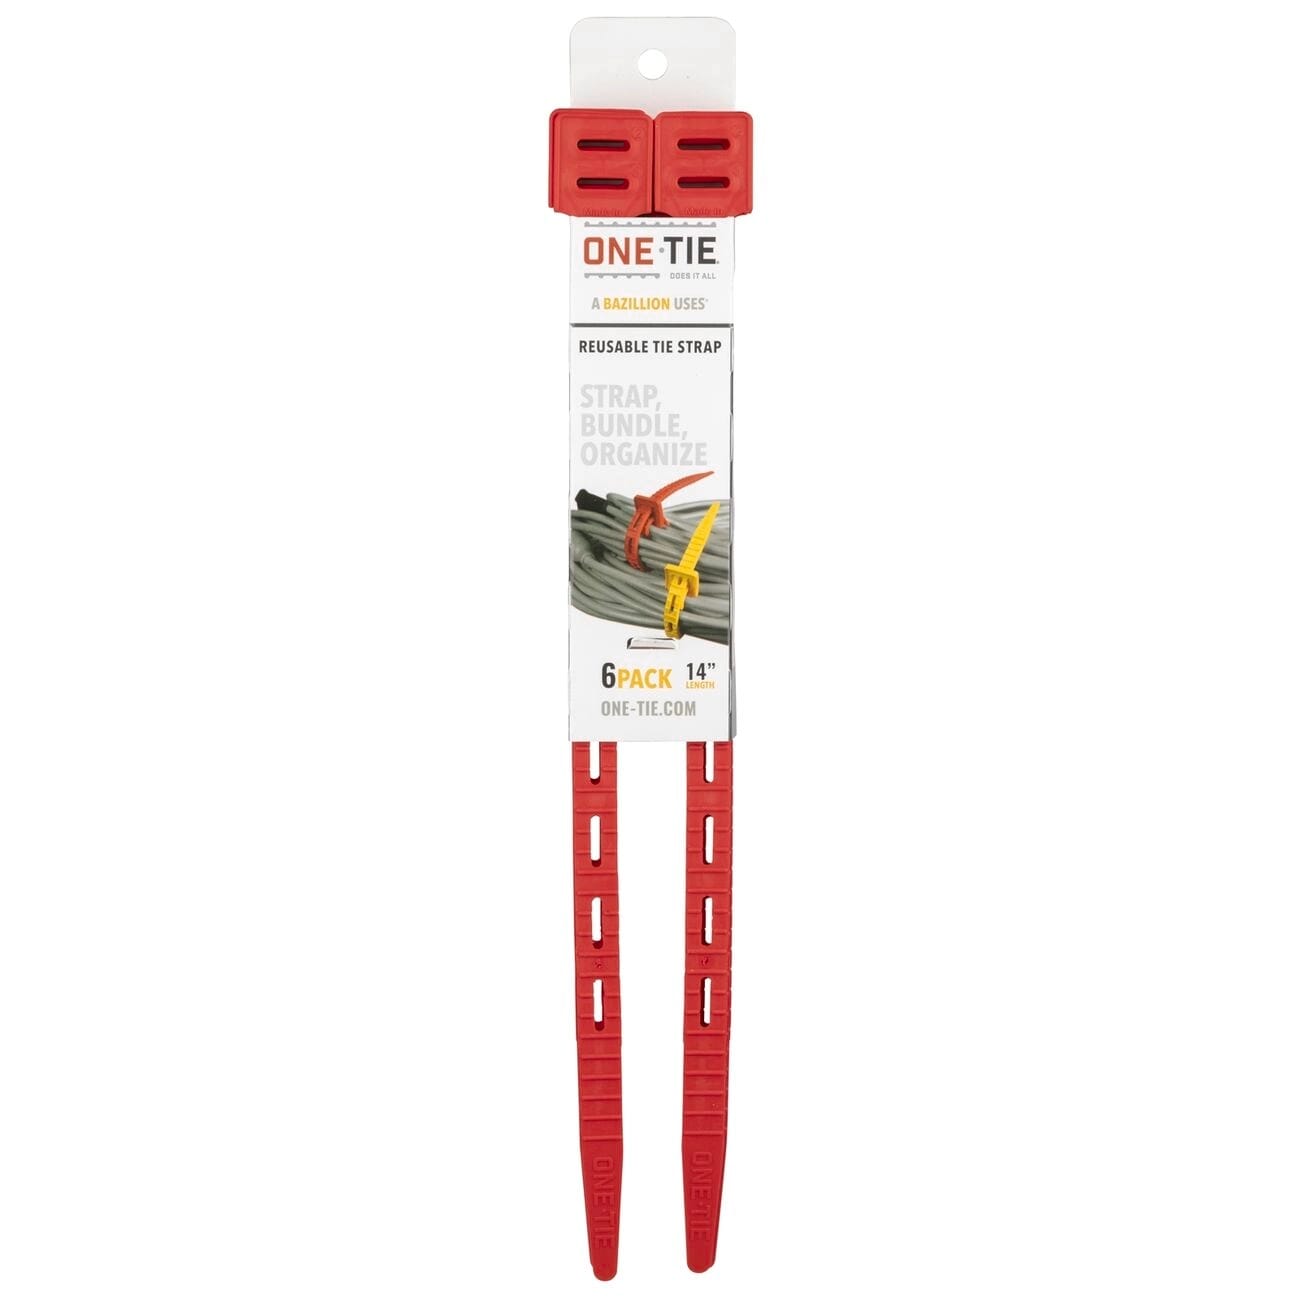 Earls One Tie - Reusable Tie Strap - Red 14" - 6 Pack